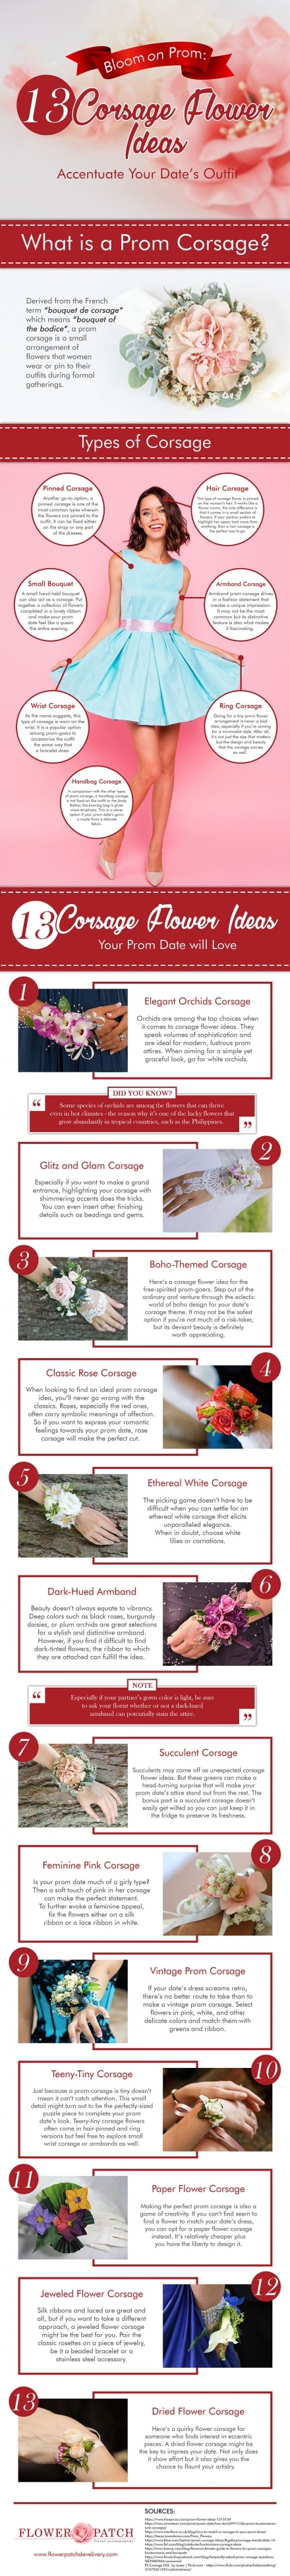 13 Corsage Flower Ideas for Your Prom Night | Blog | Flower Patch ...